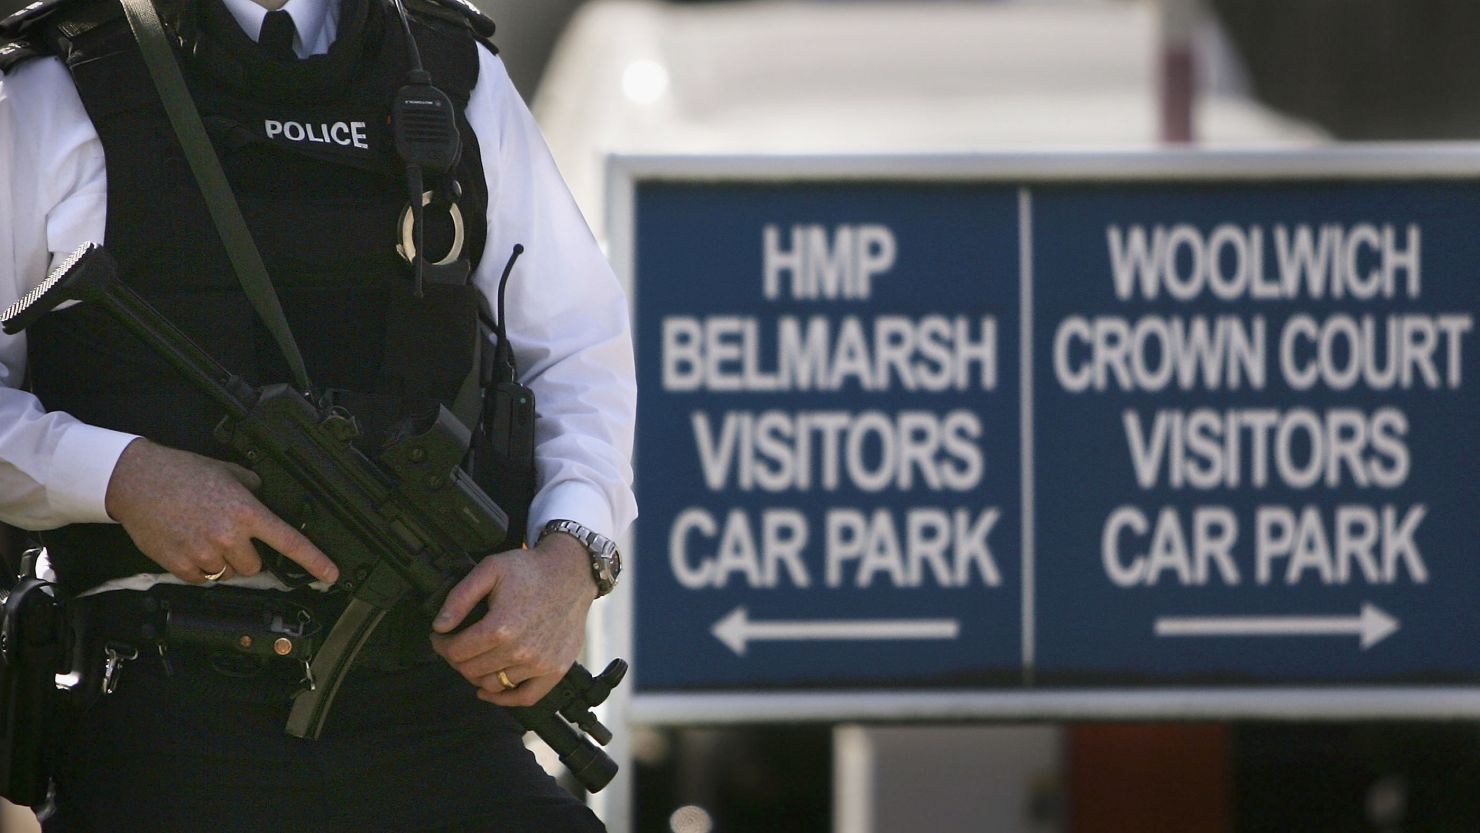 A file image of an armed police officer standing outside Belmarsh prison and Law Courts, August 8, 2005.